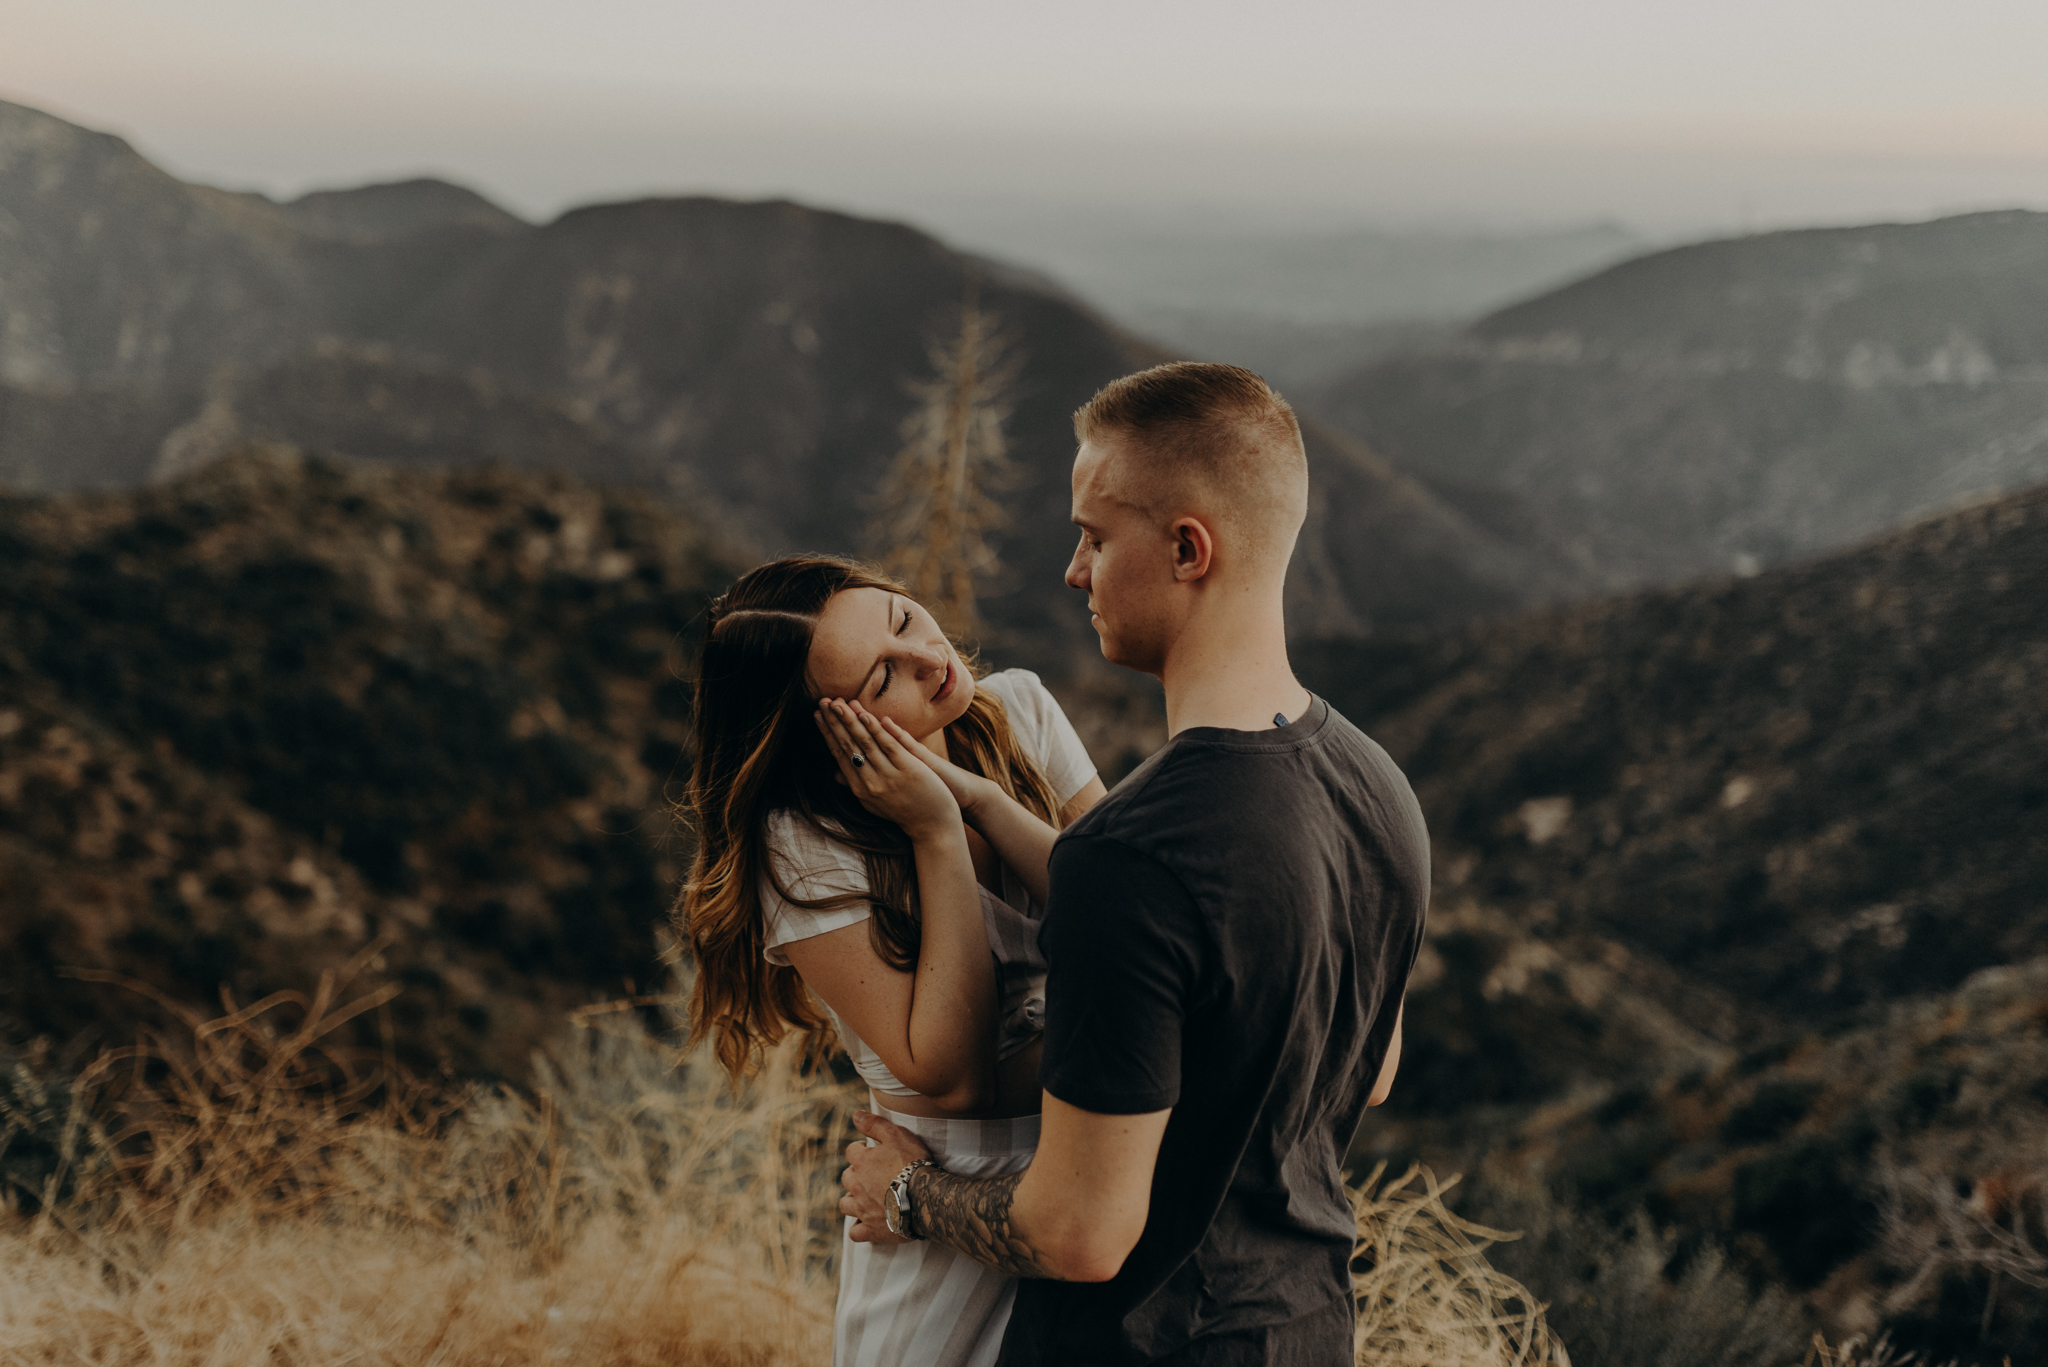 Isaiah + Taylor Photography - Los Angeles Forest Engagement Session - Laid back wedding photographer-010.jpg